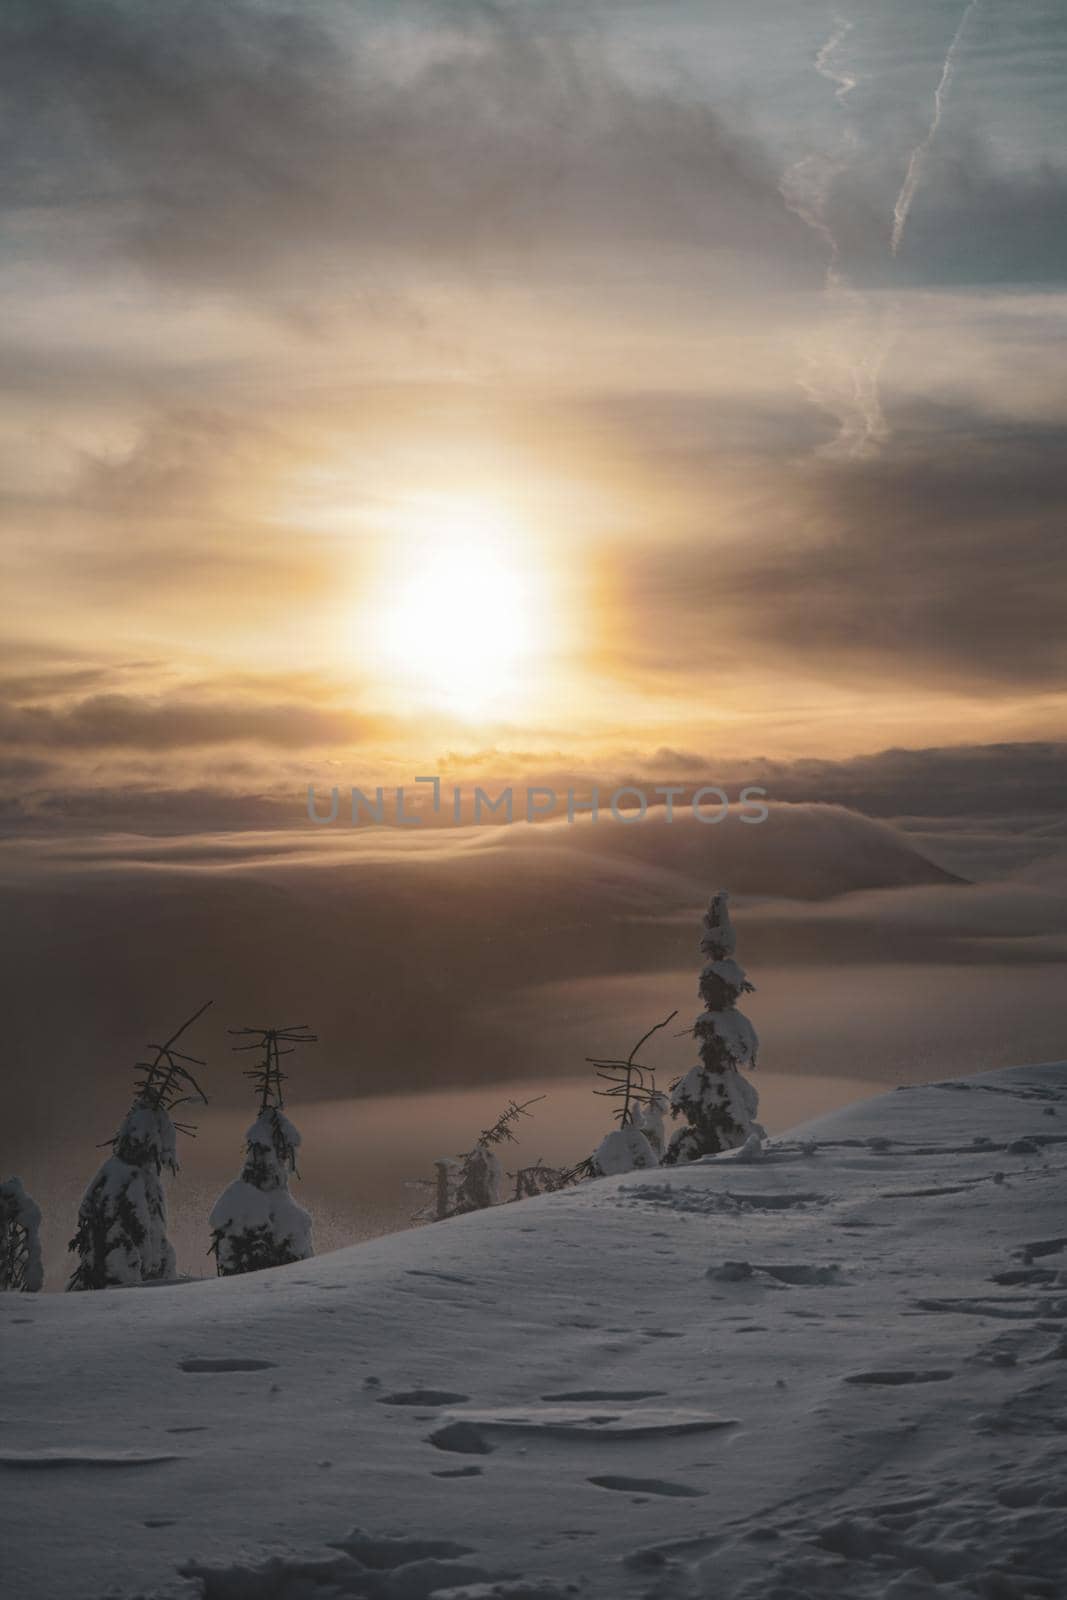 Mountain Peak Sunset With Inversion Low Clouds and Frozen Trees by Skrobanek